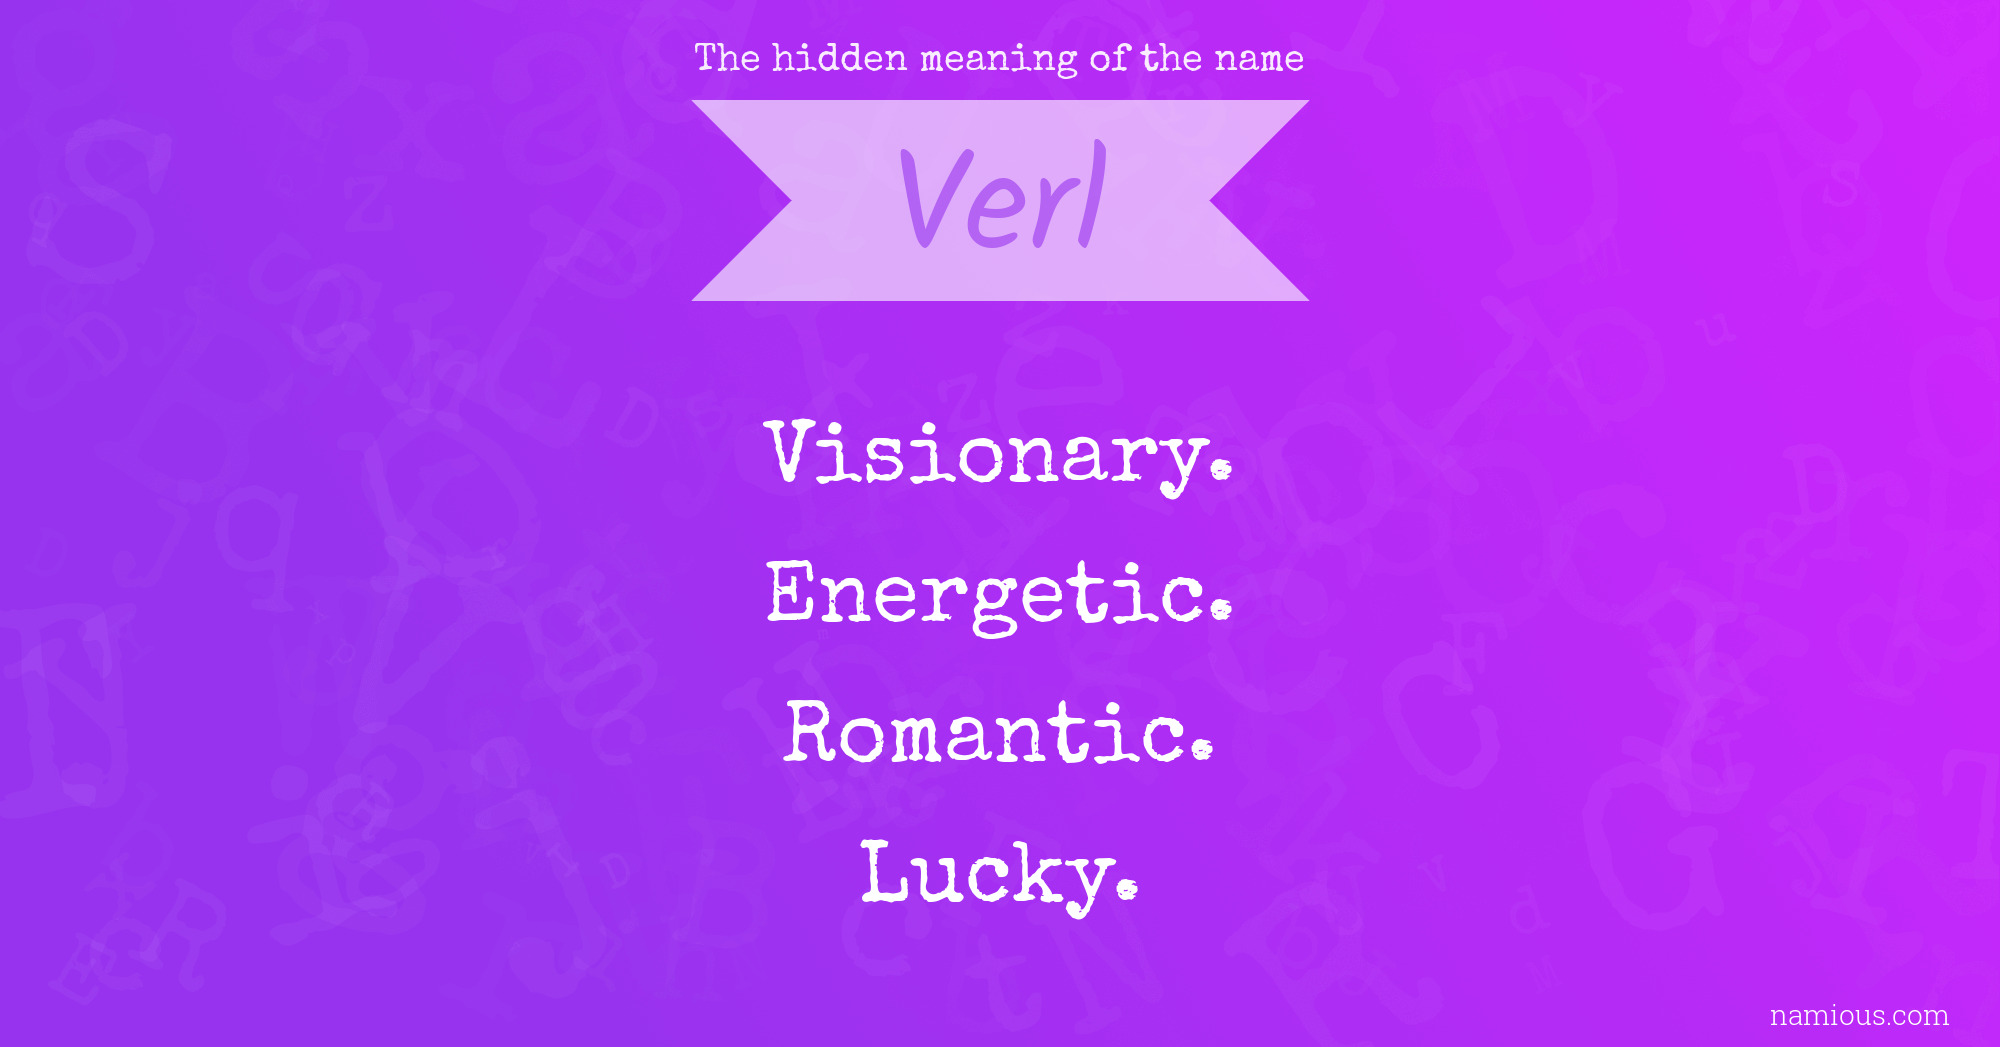 The hidden meaning of the name Verl